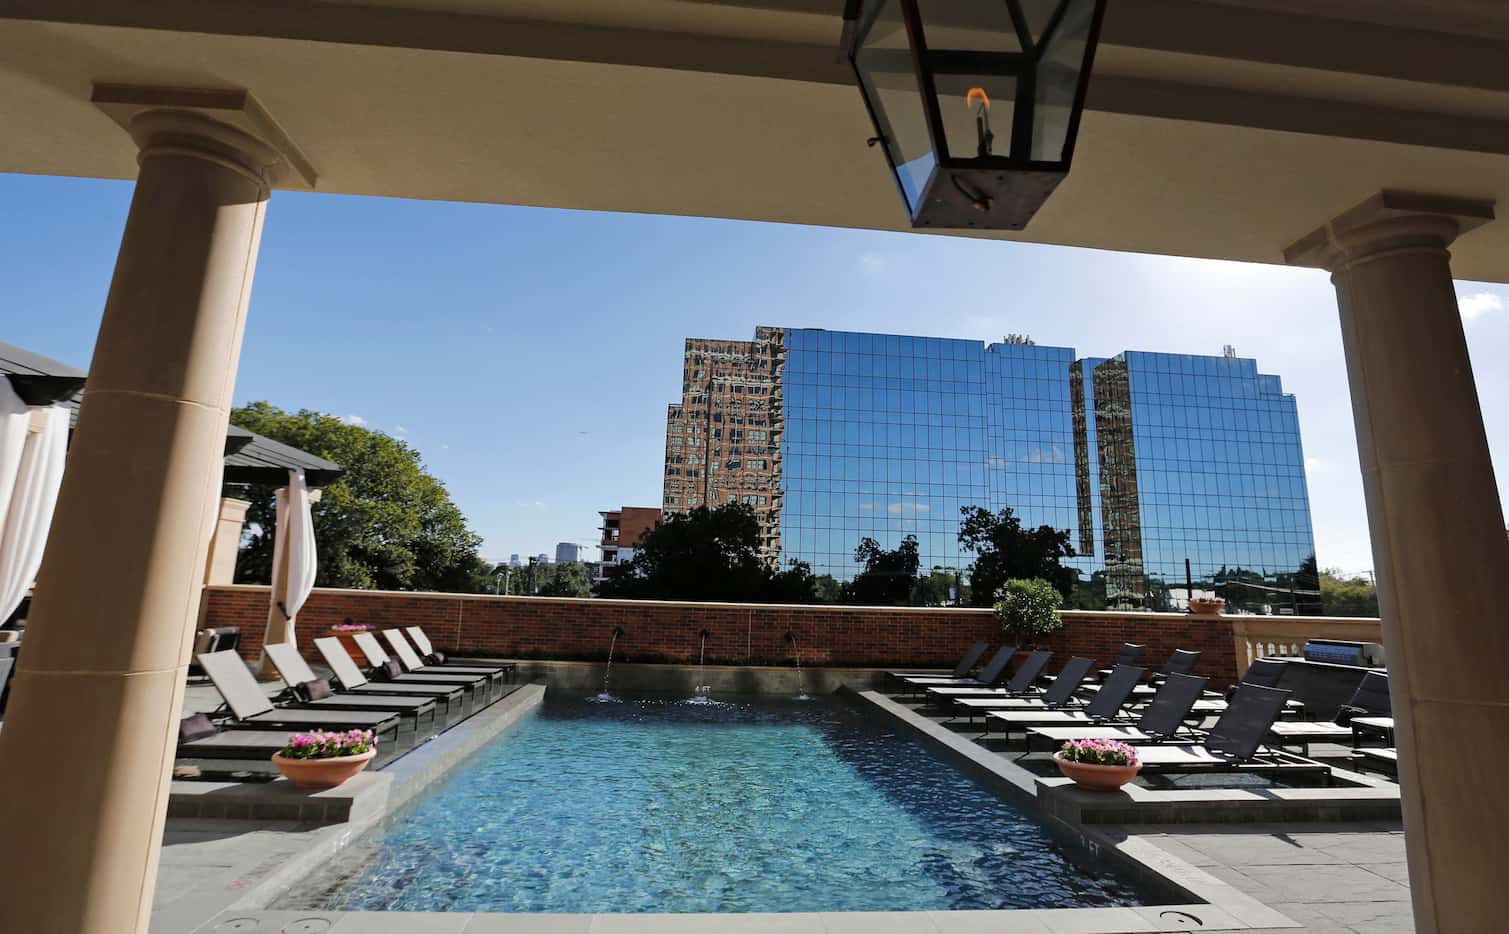 The pool on the third floor at the McKenzie, a new luxury 

residential tower on the edge of...